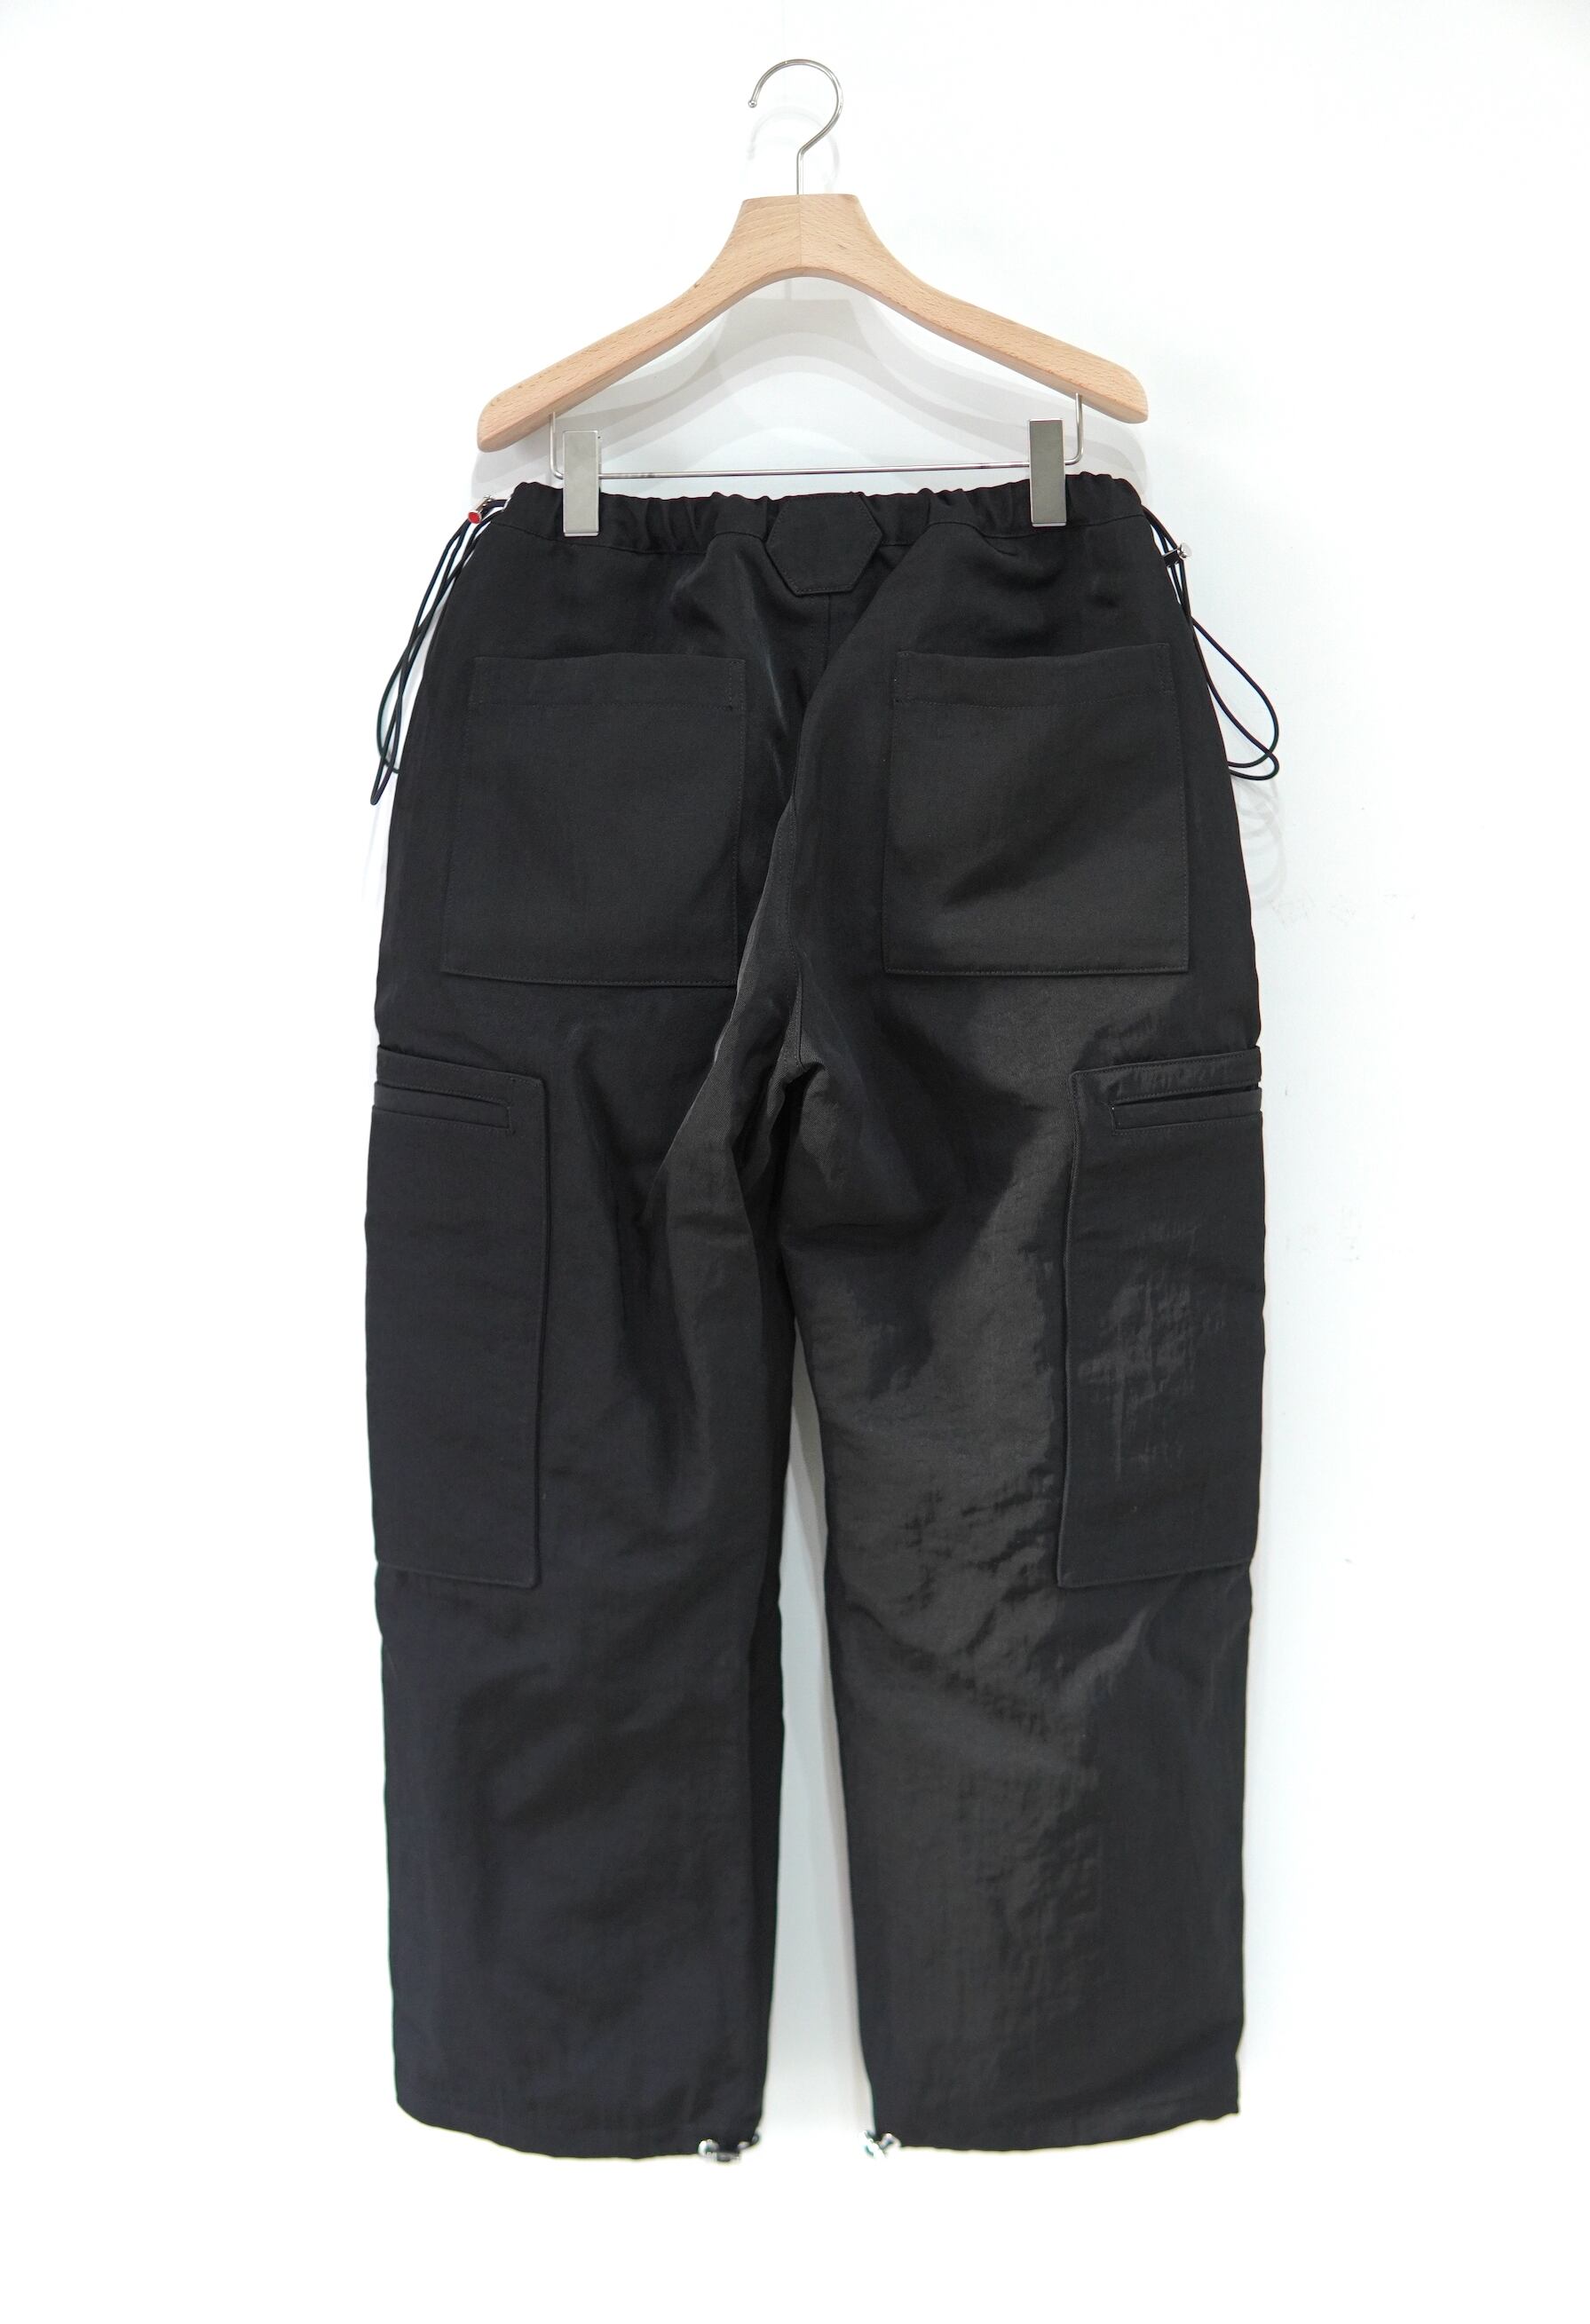 OUAT / 008 CHAN NEL TROUSERS -BLACK- size 2 | POETRY